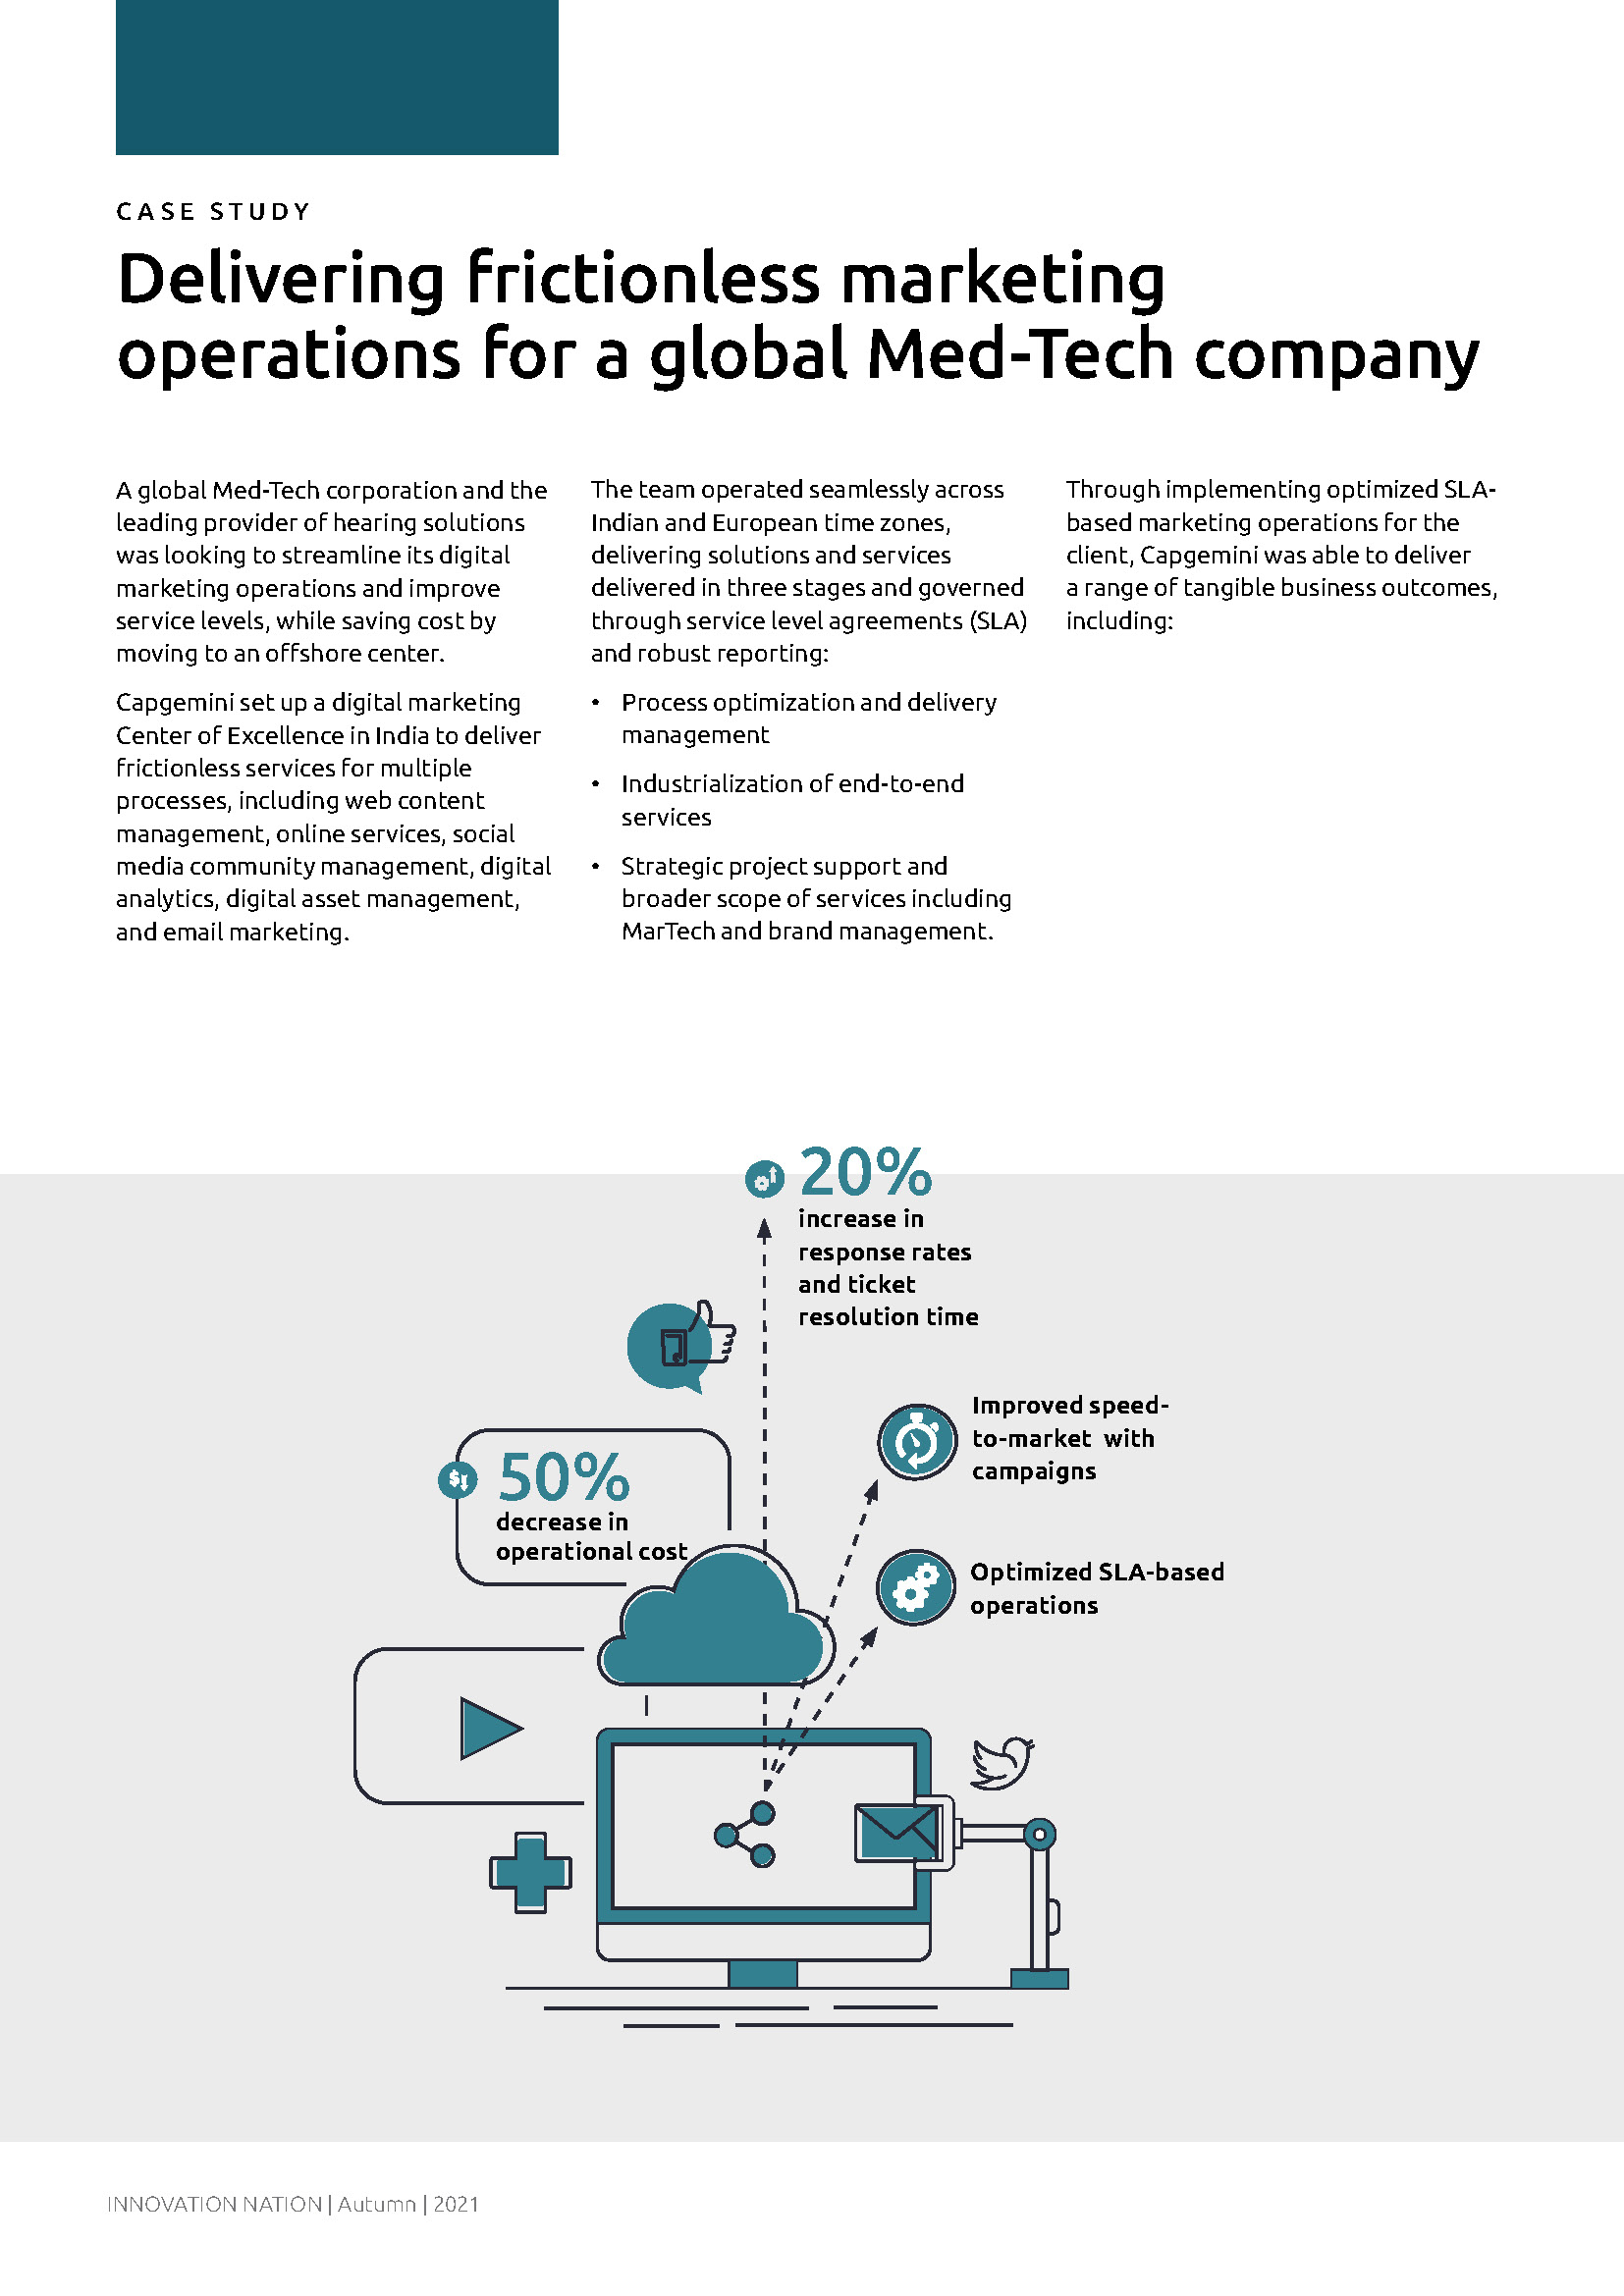 CASE STUDY - Delivering frictionless marketing operations for a global Med-Tech company